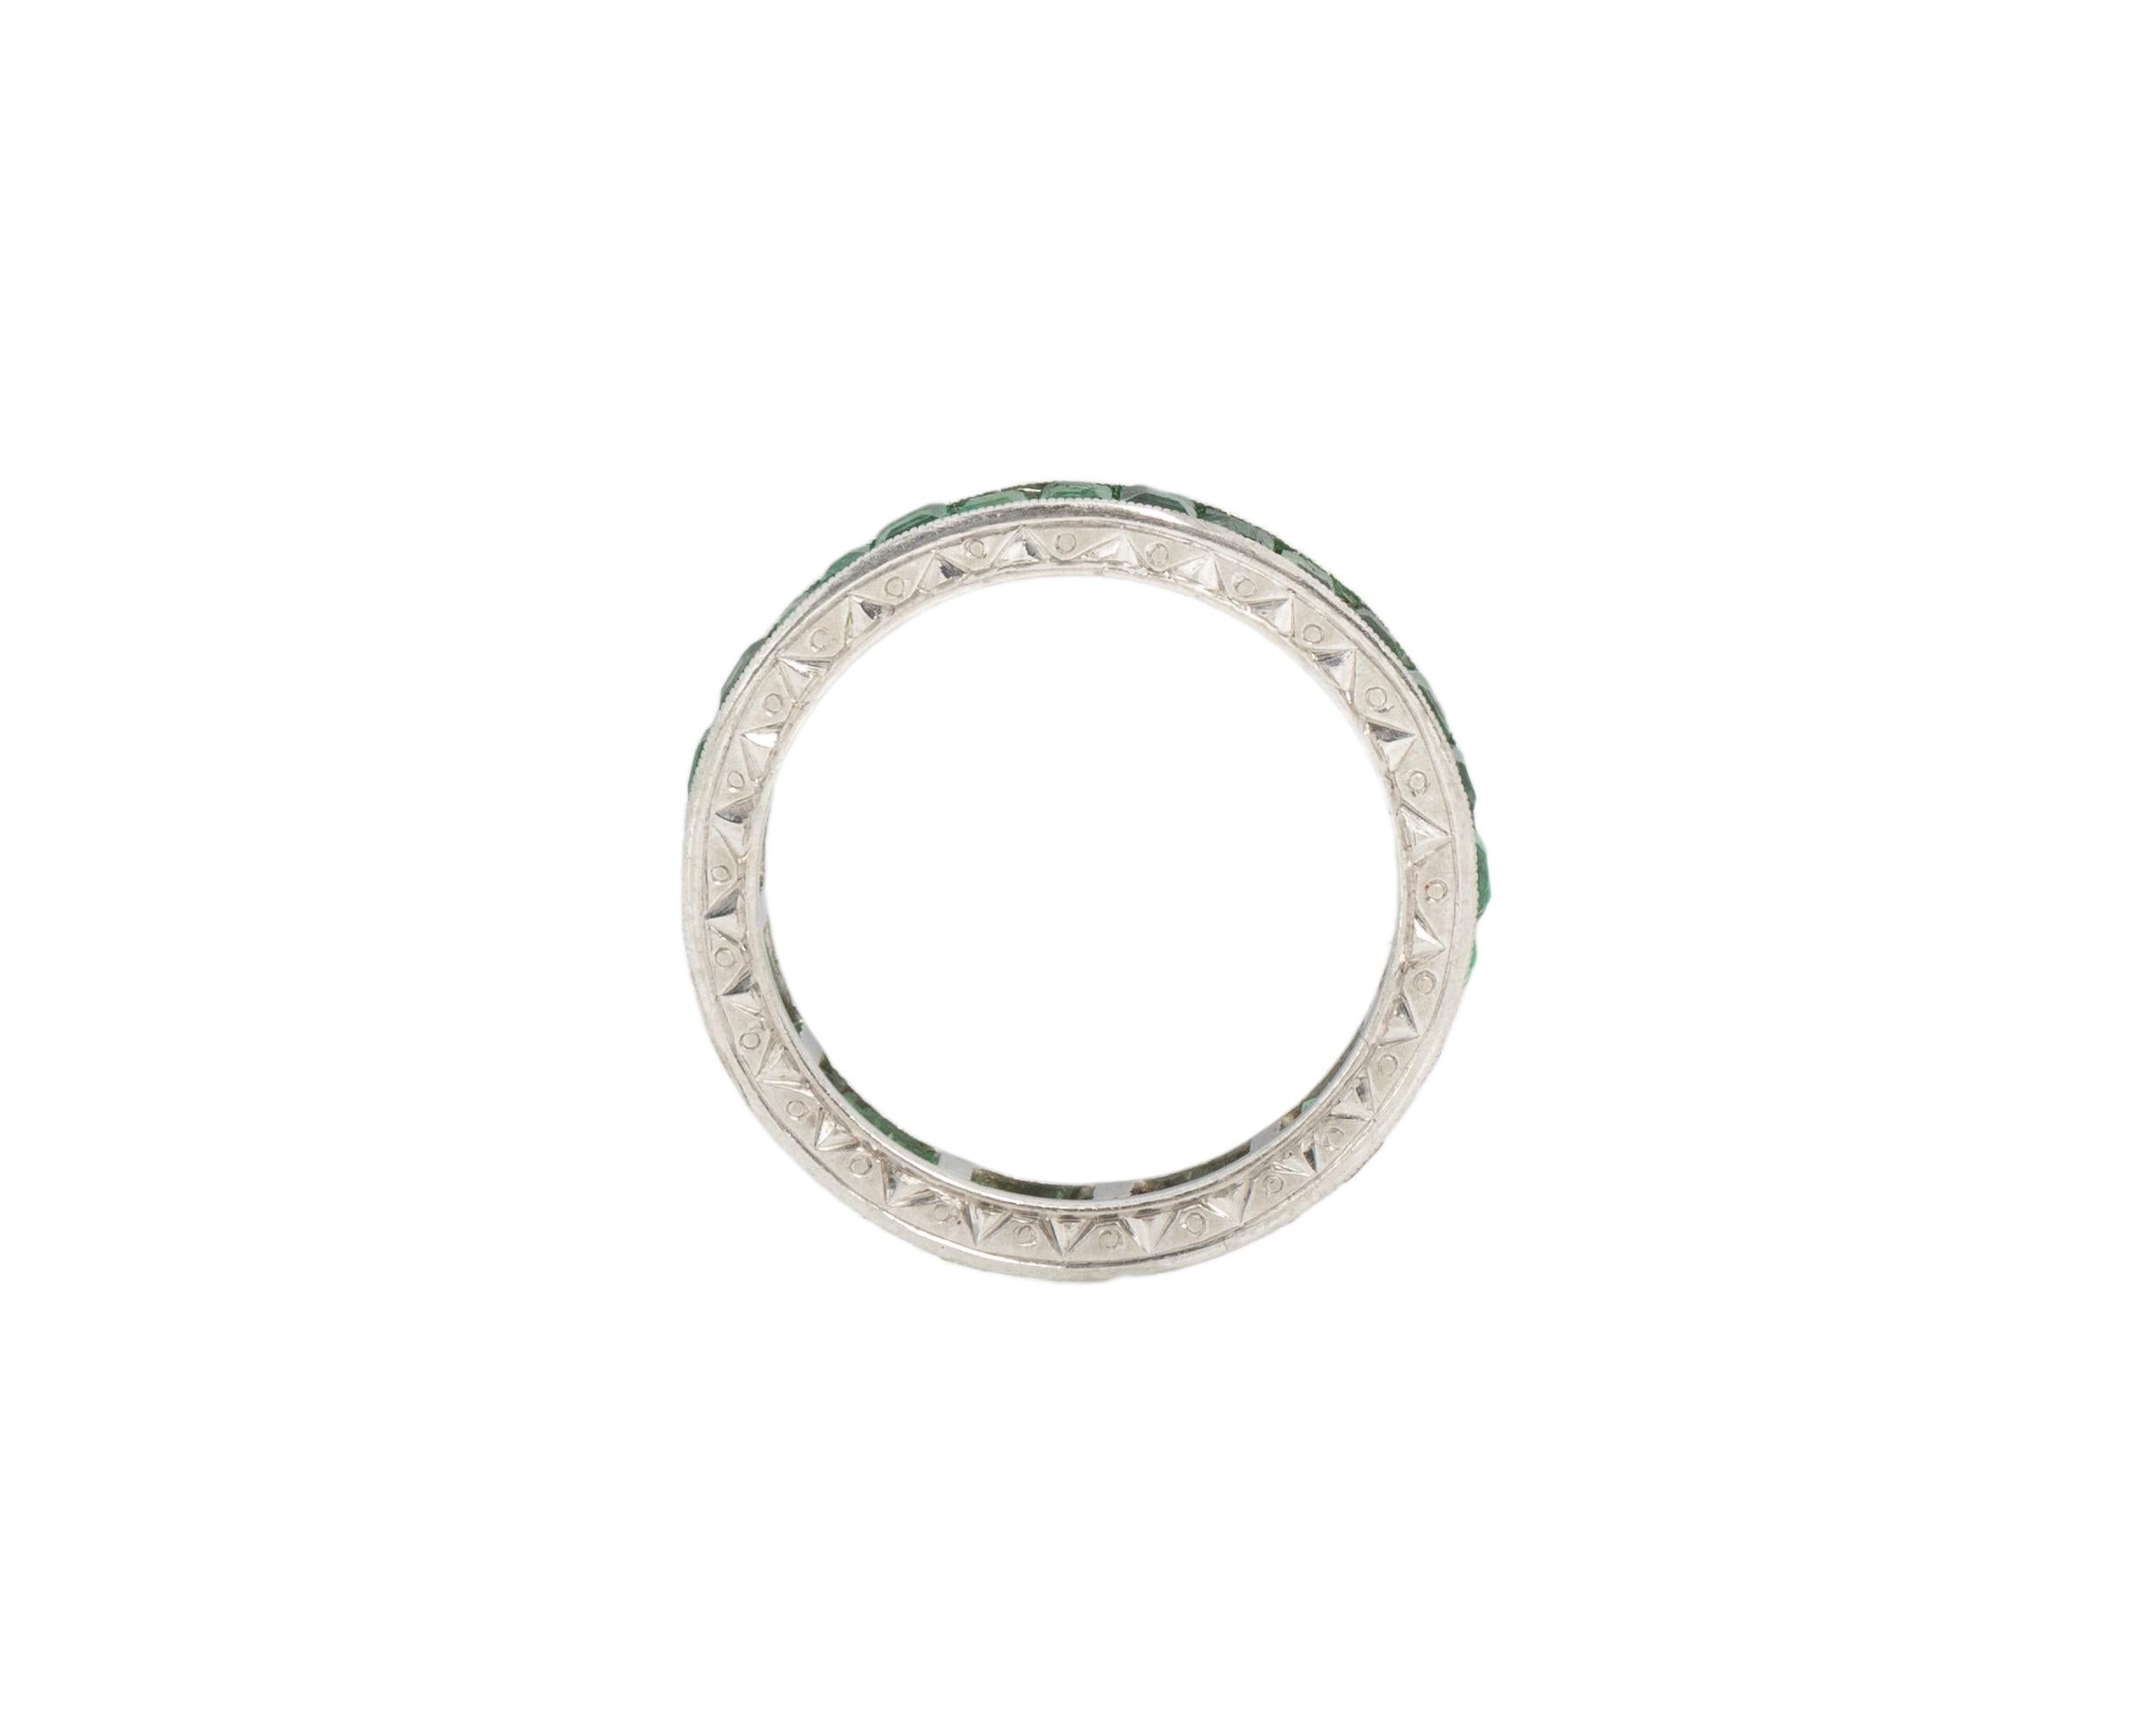 Ring Size: 4.25
Metal Type: Platinum [Hallmarked, and Tested]
Weight: 2.3 grams

Emerald Details:
Weight: 2.00ct, total
Cut: Square Step Cut
Color: Green

Finger to Top of Stone Measurement: 2.0mm
Shank/Band Width: 2.9mm
Condition: Excellent